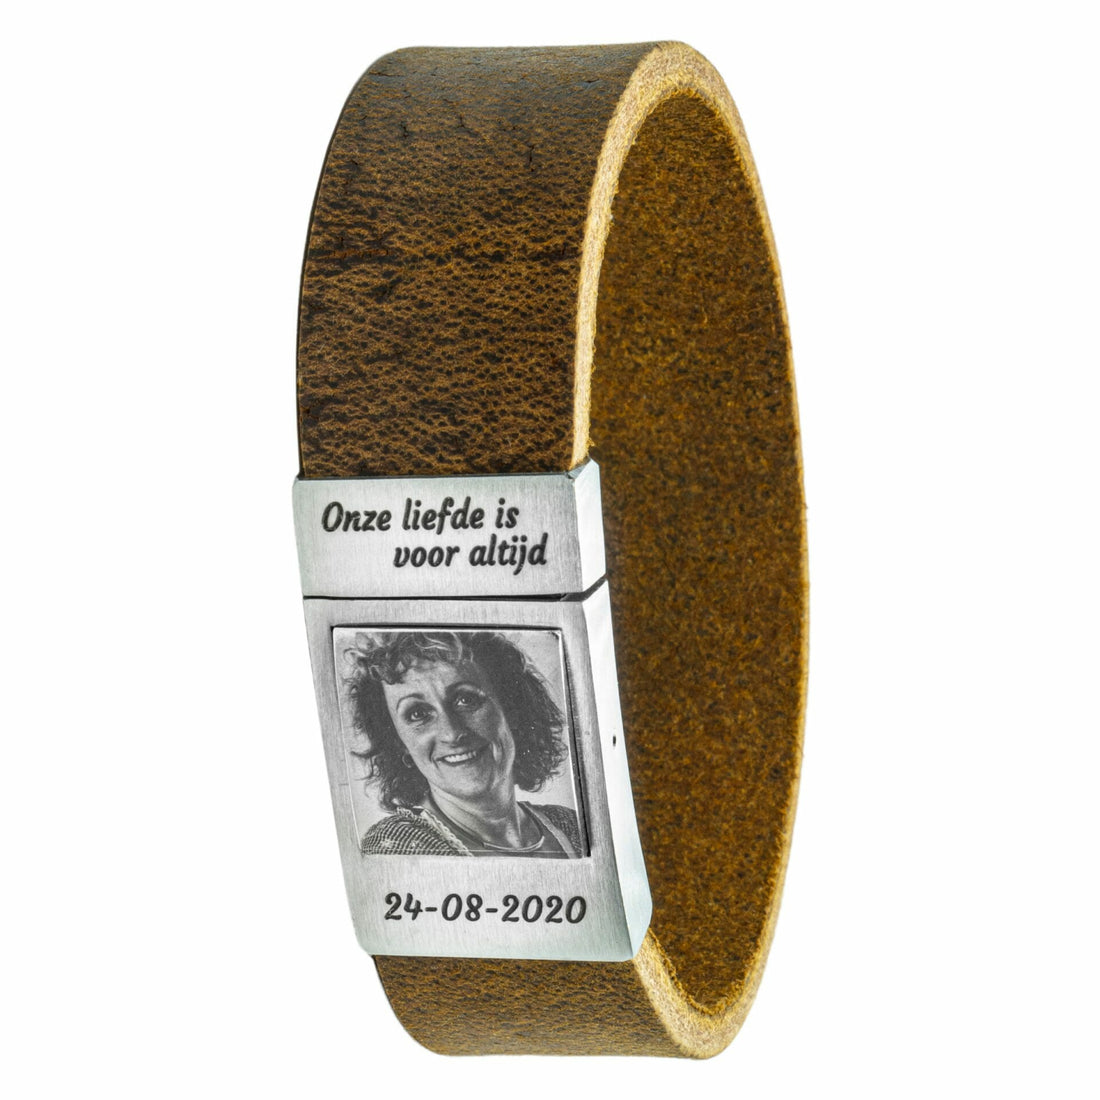 <b>Vintage</b> leather photo bracelet with your own photo